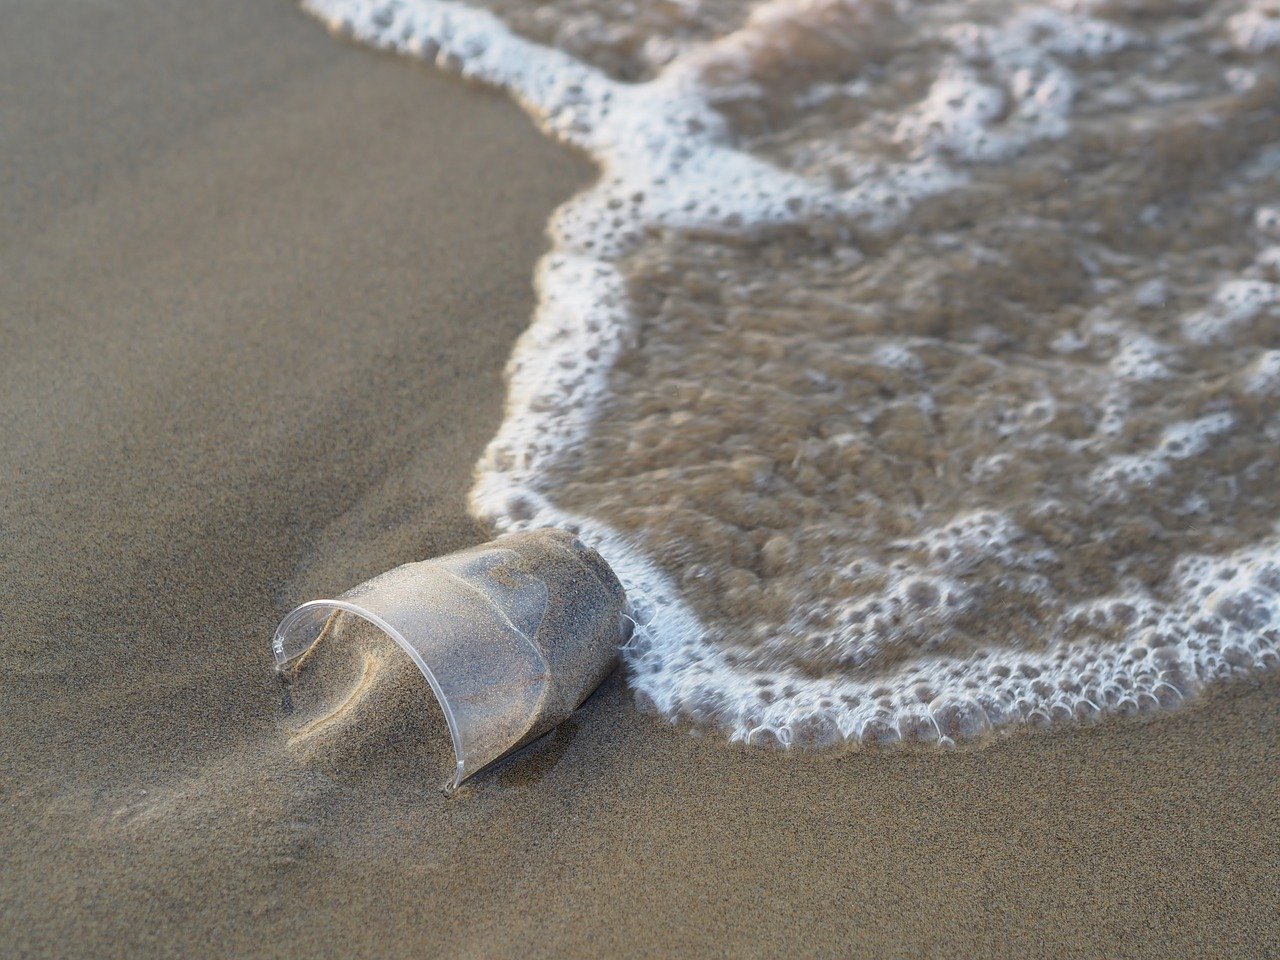 a photo of a plastic cup in the surf